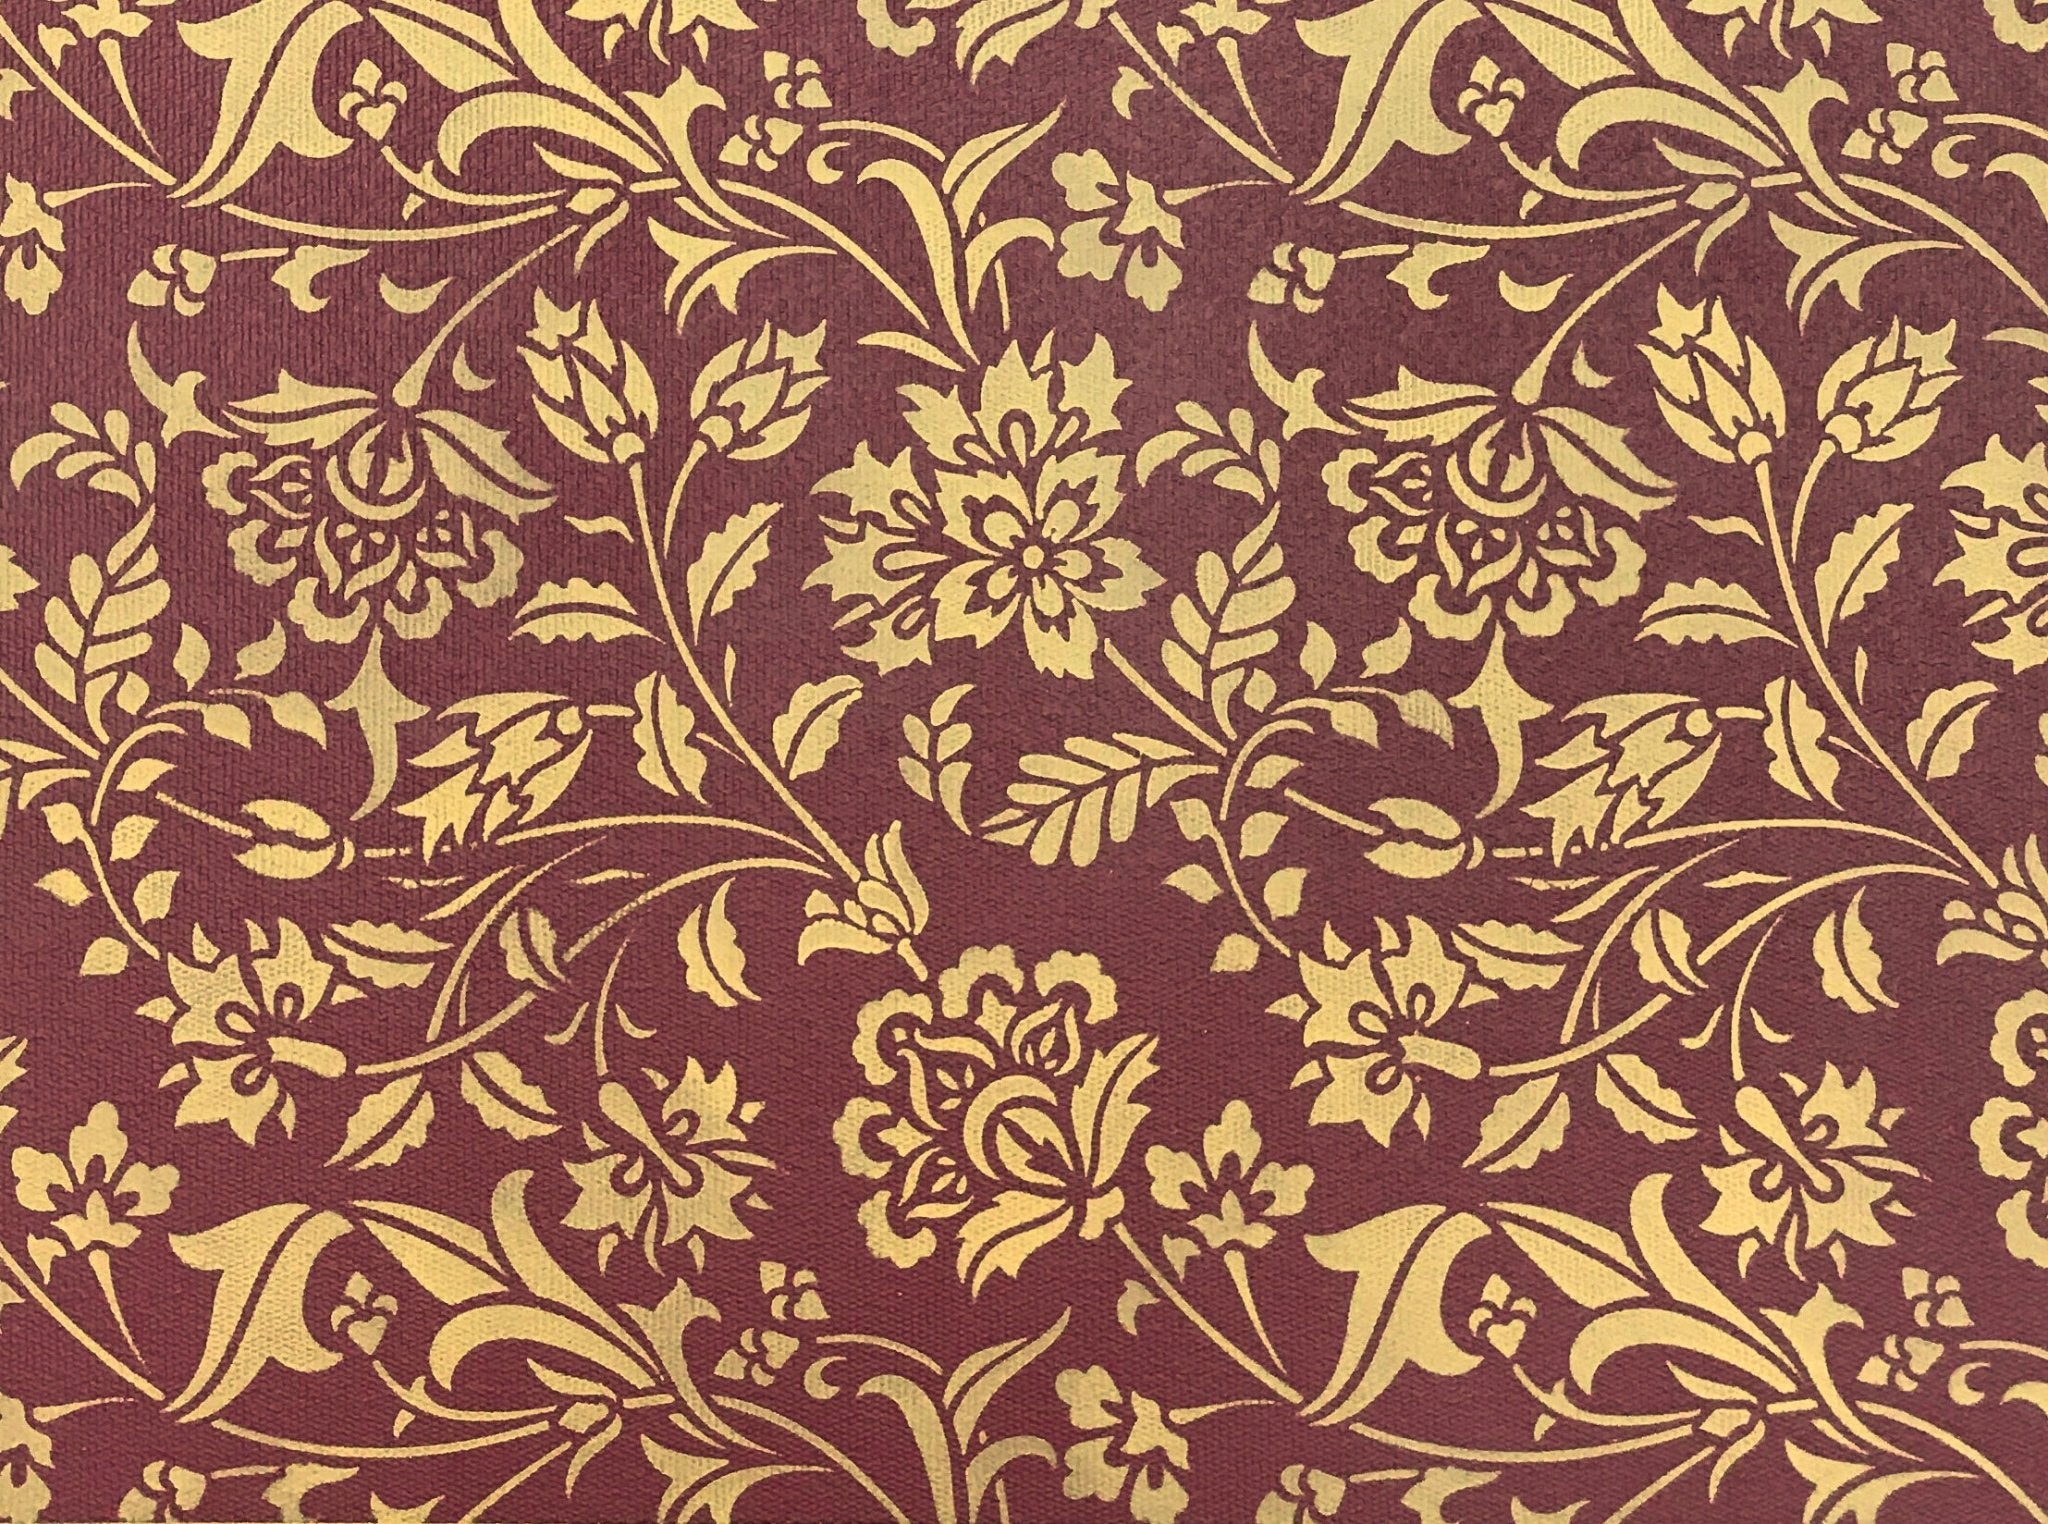 A close-up of the intricate floral pattern adorning this floorcloth runner..